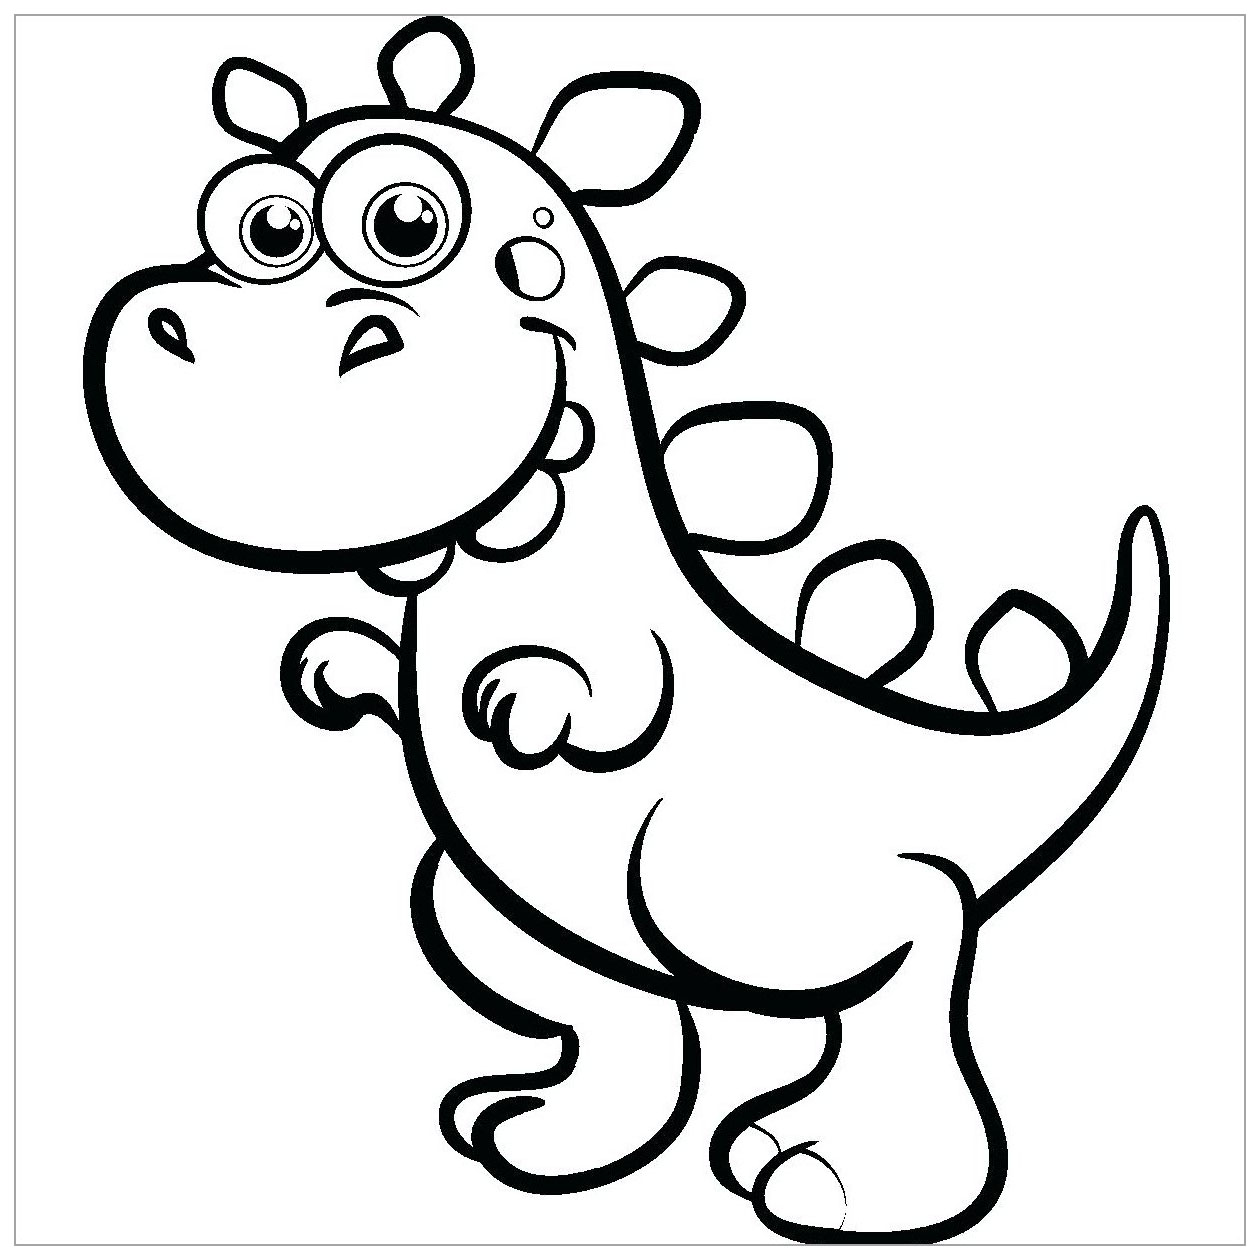 Dinosaurs to download  T Rex cartoon   Dinosaurs Kids Coloring Pages